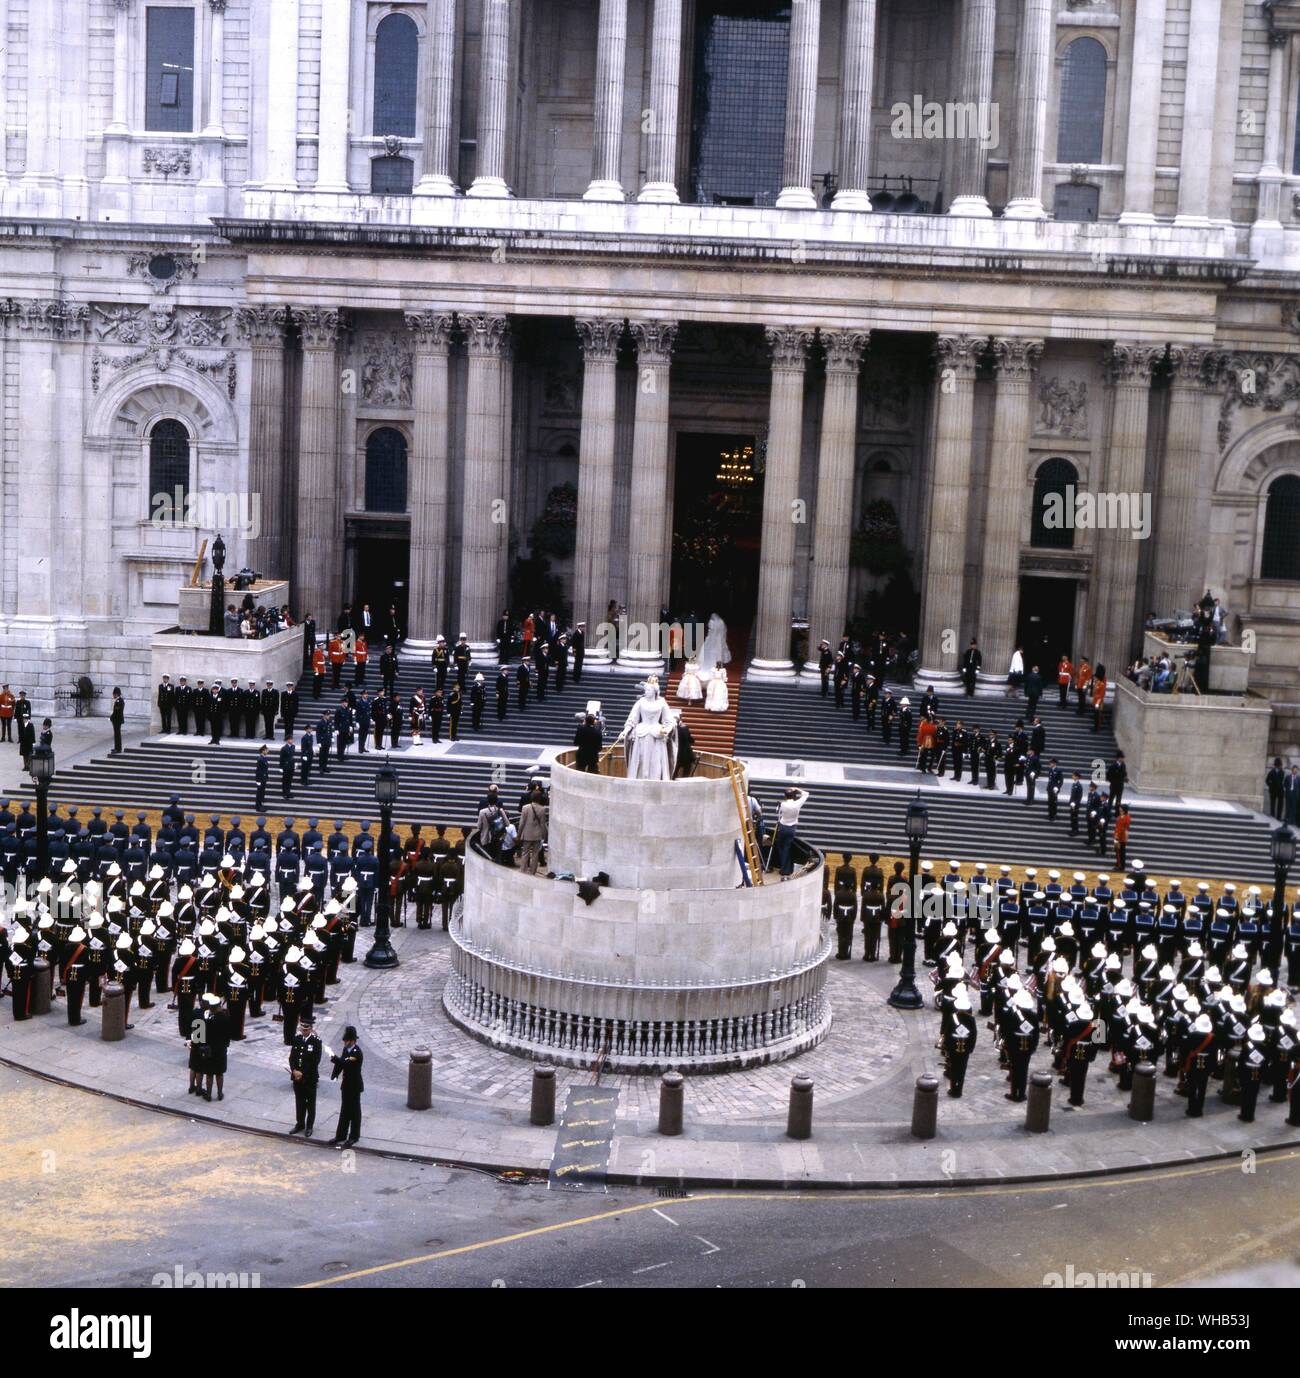 Earl Spencer and Lady Diana Spencer entering St. Pauls on the day of her marriage to Prince Charles - 29 July 1981. Stock Photo